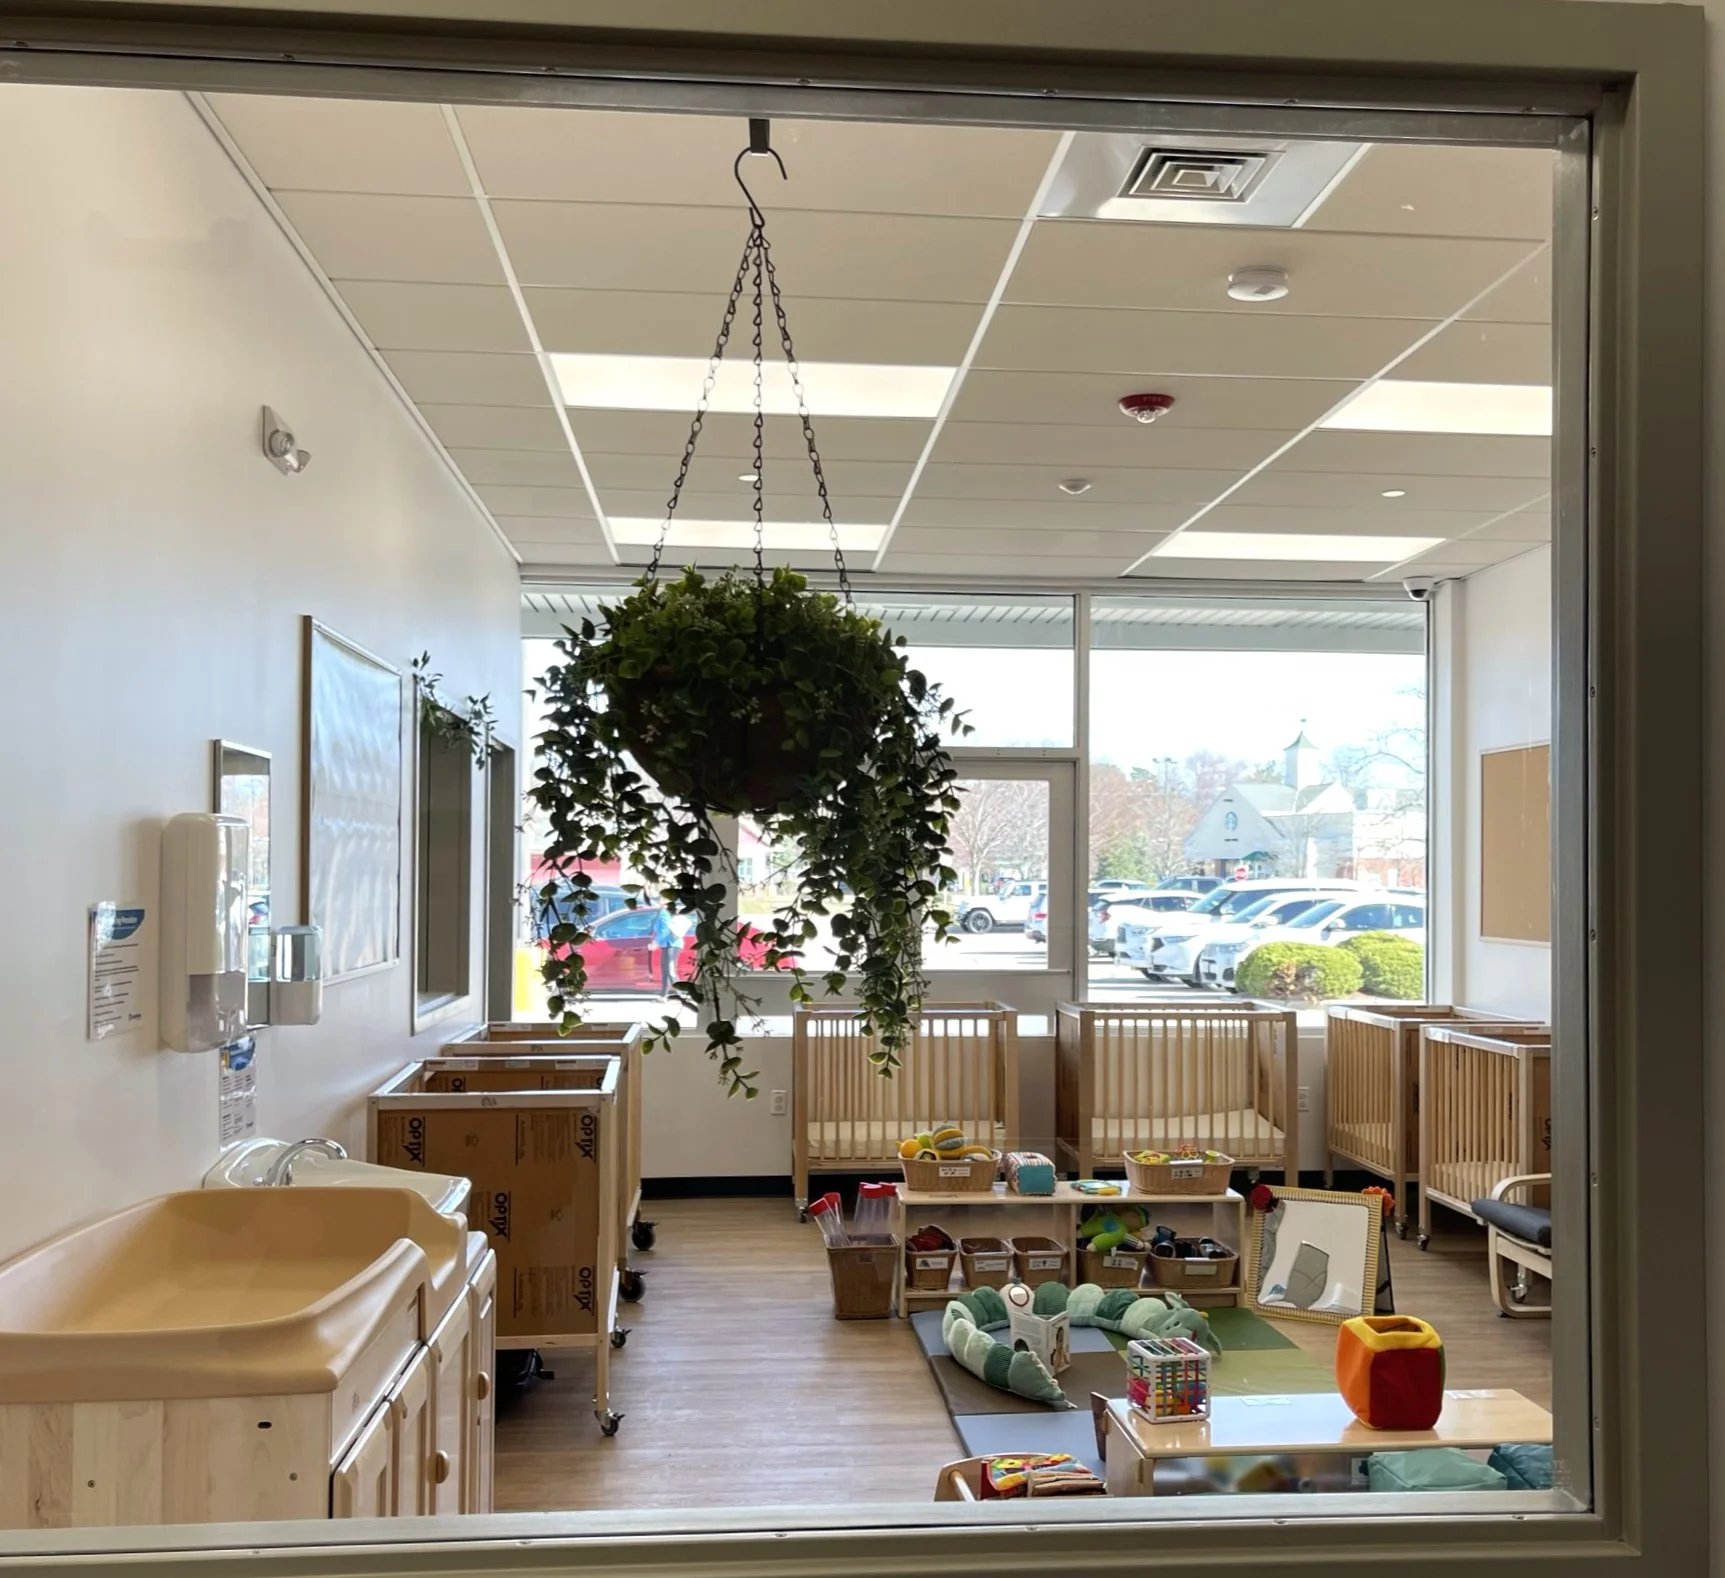 State-of-the-art facilities at BrightPath Medway Child Care Center.